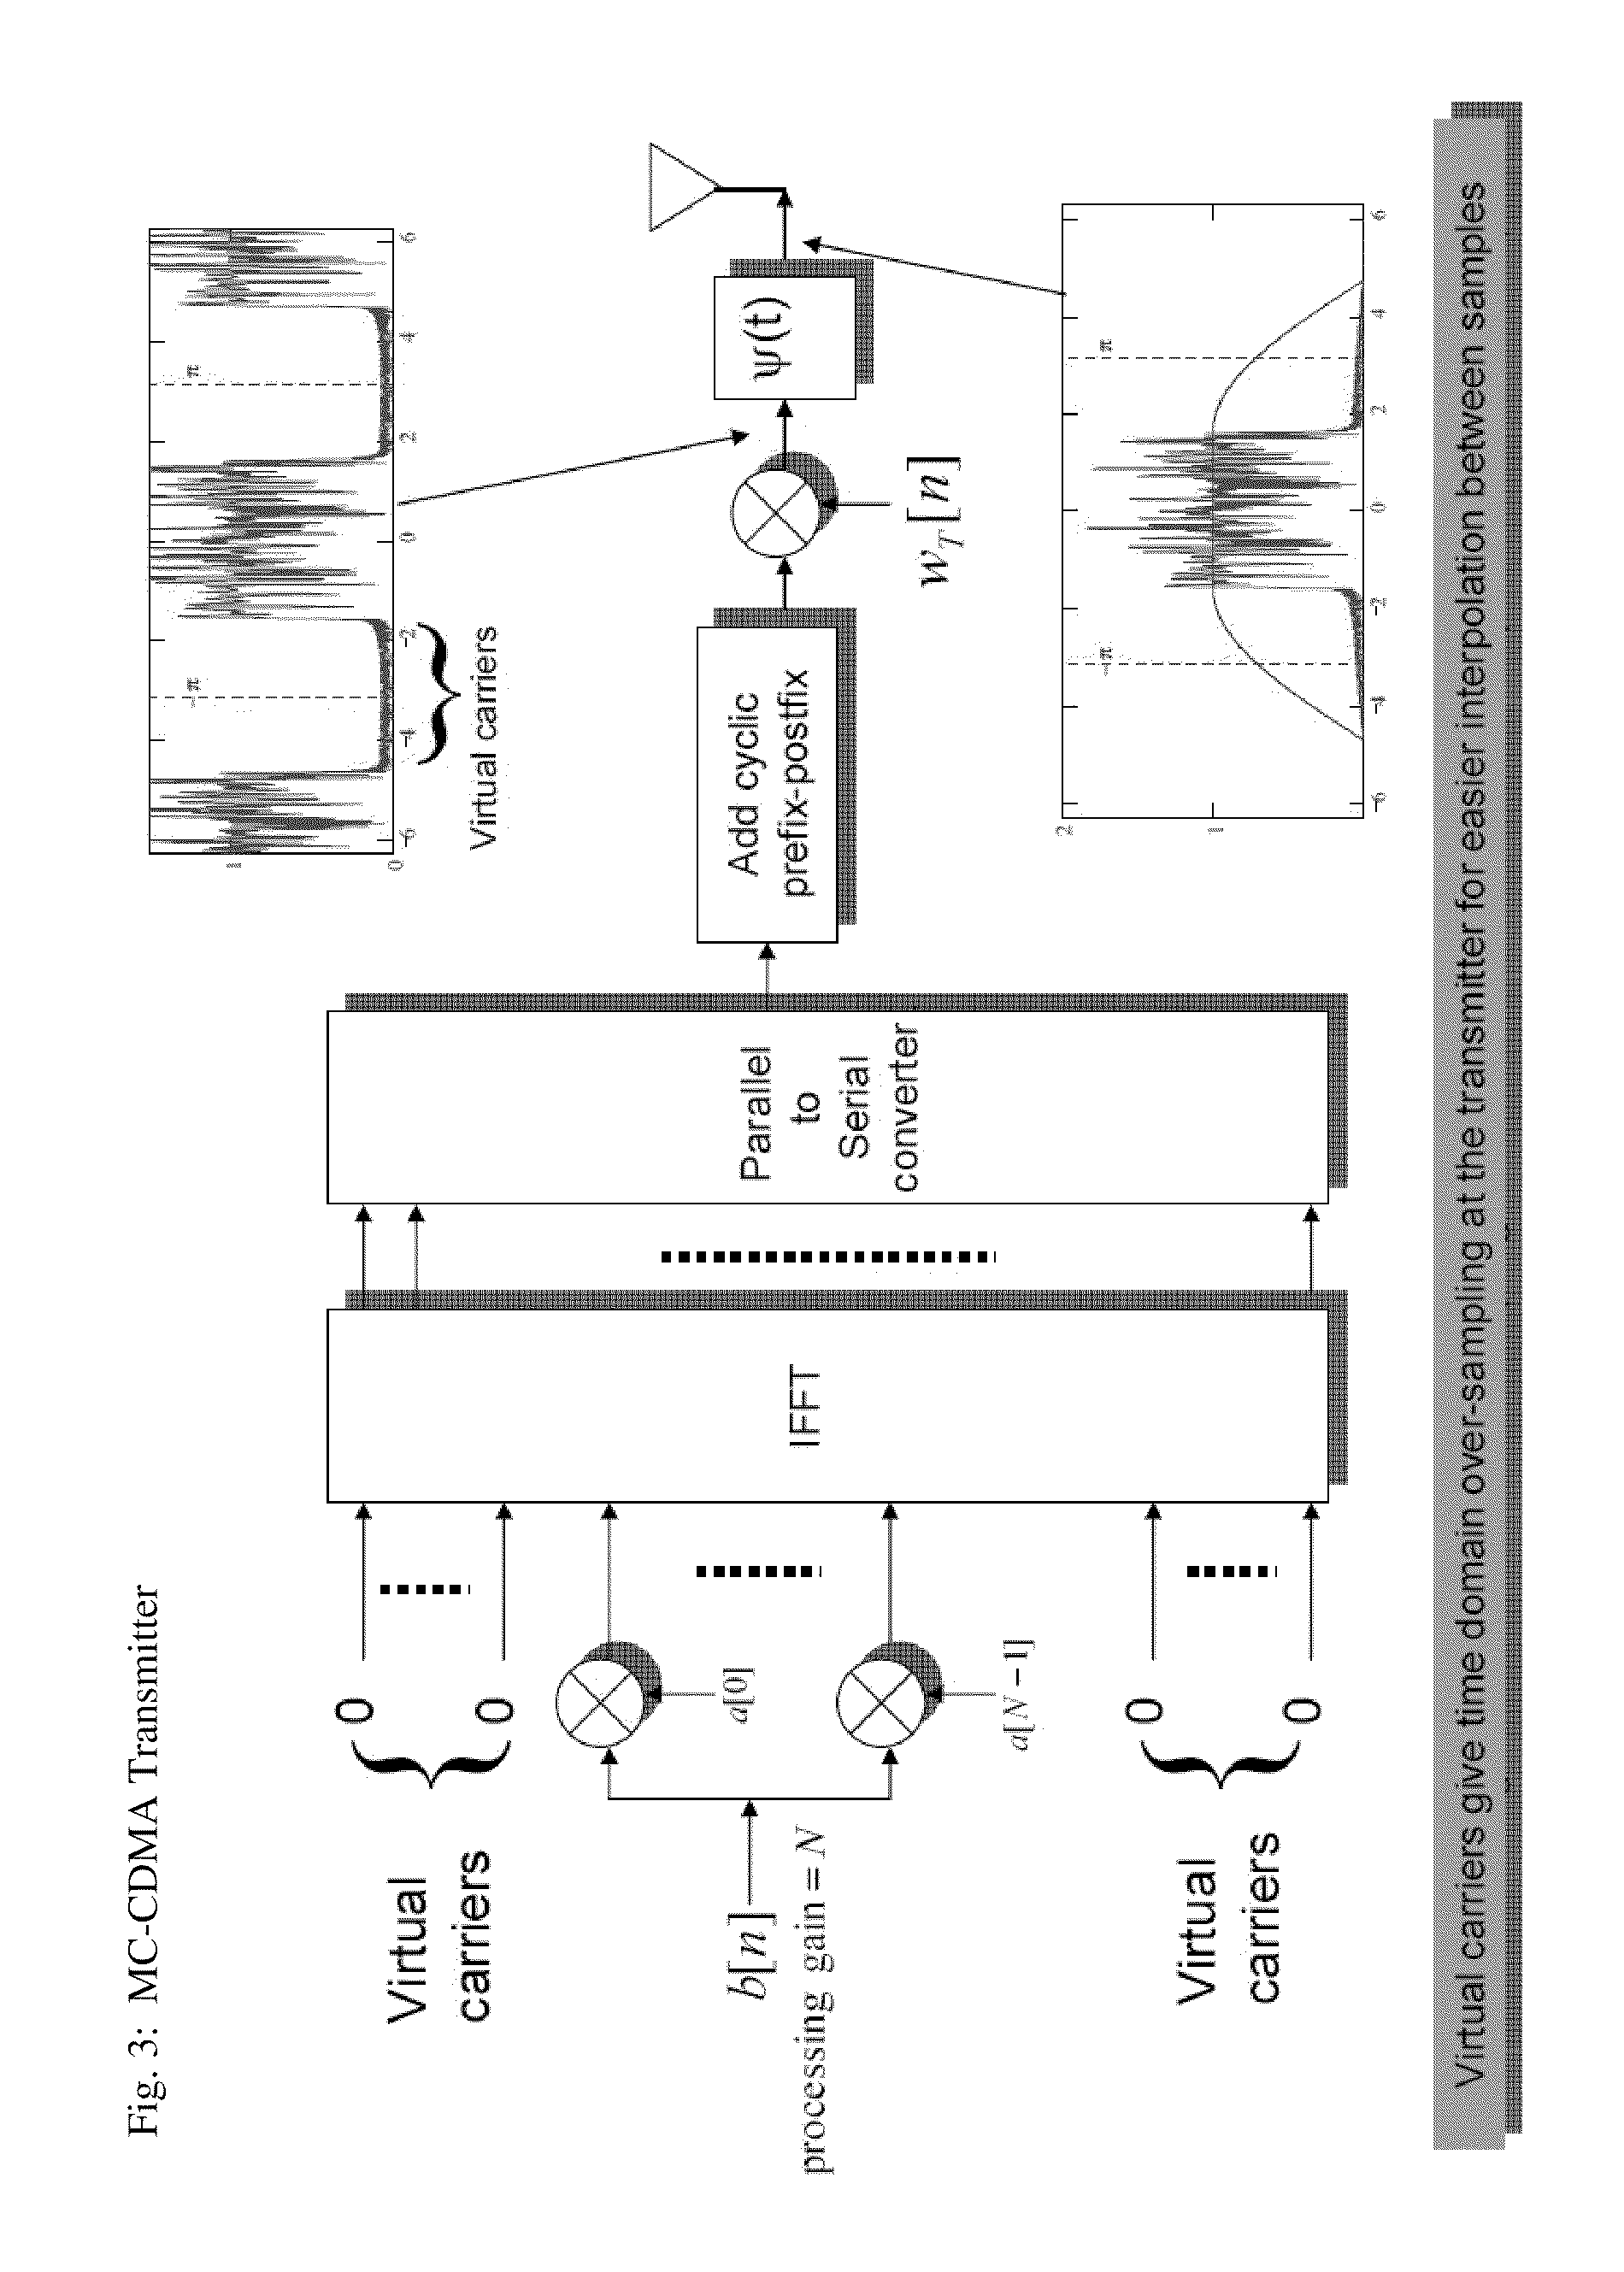 Method for multiple-access interference suppression for MC-CDMA by frequency domain oversampling